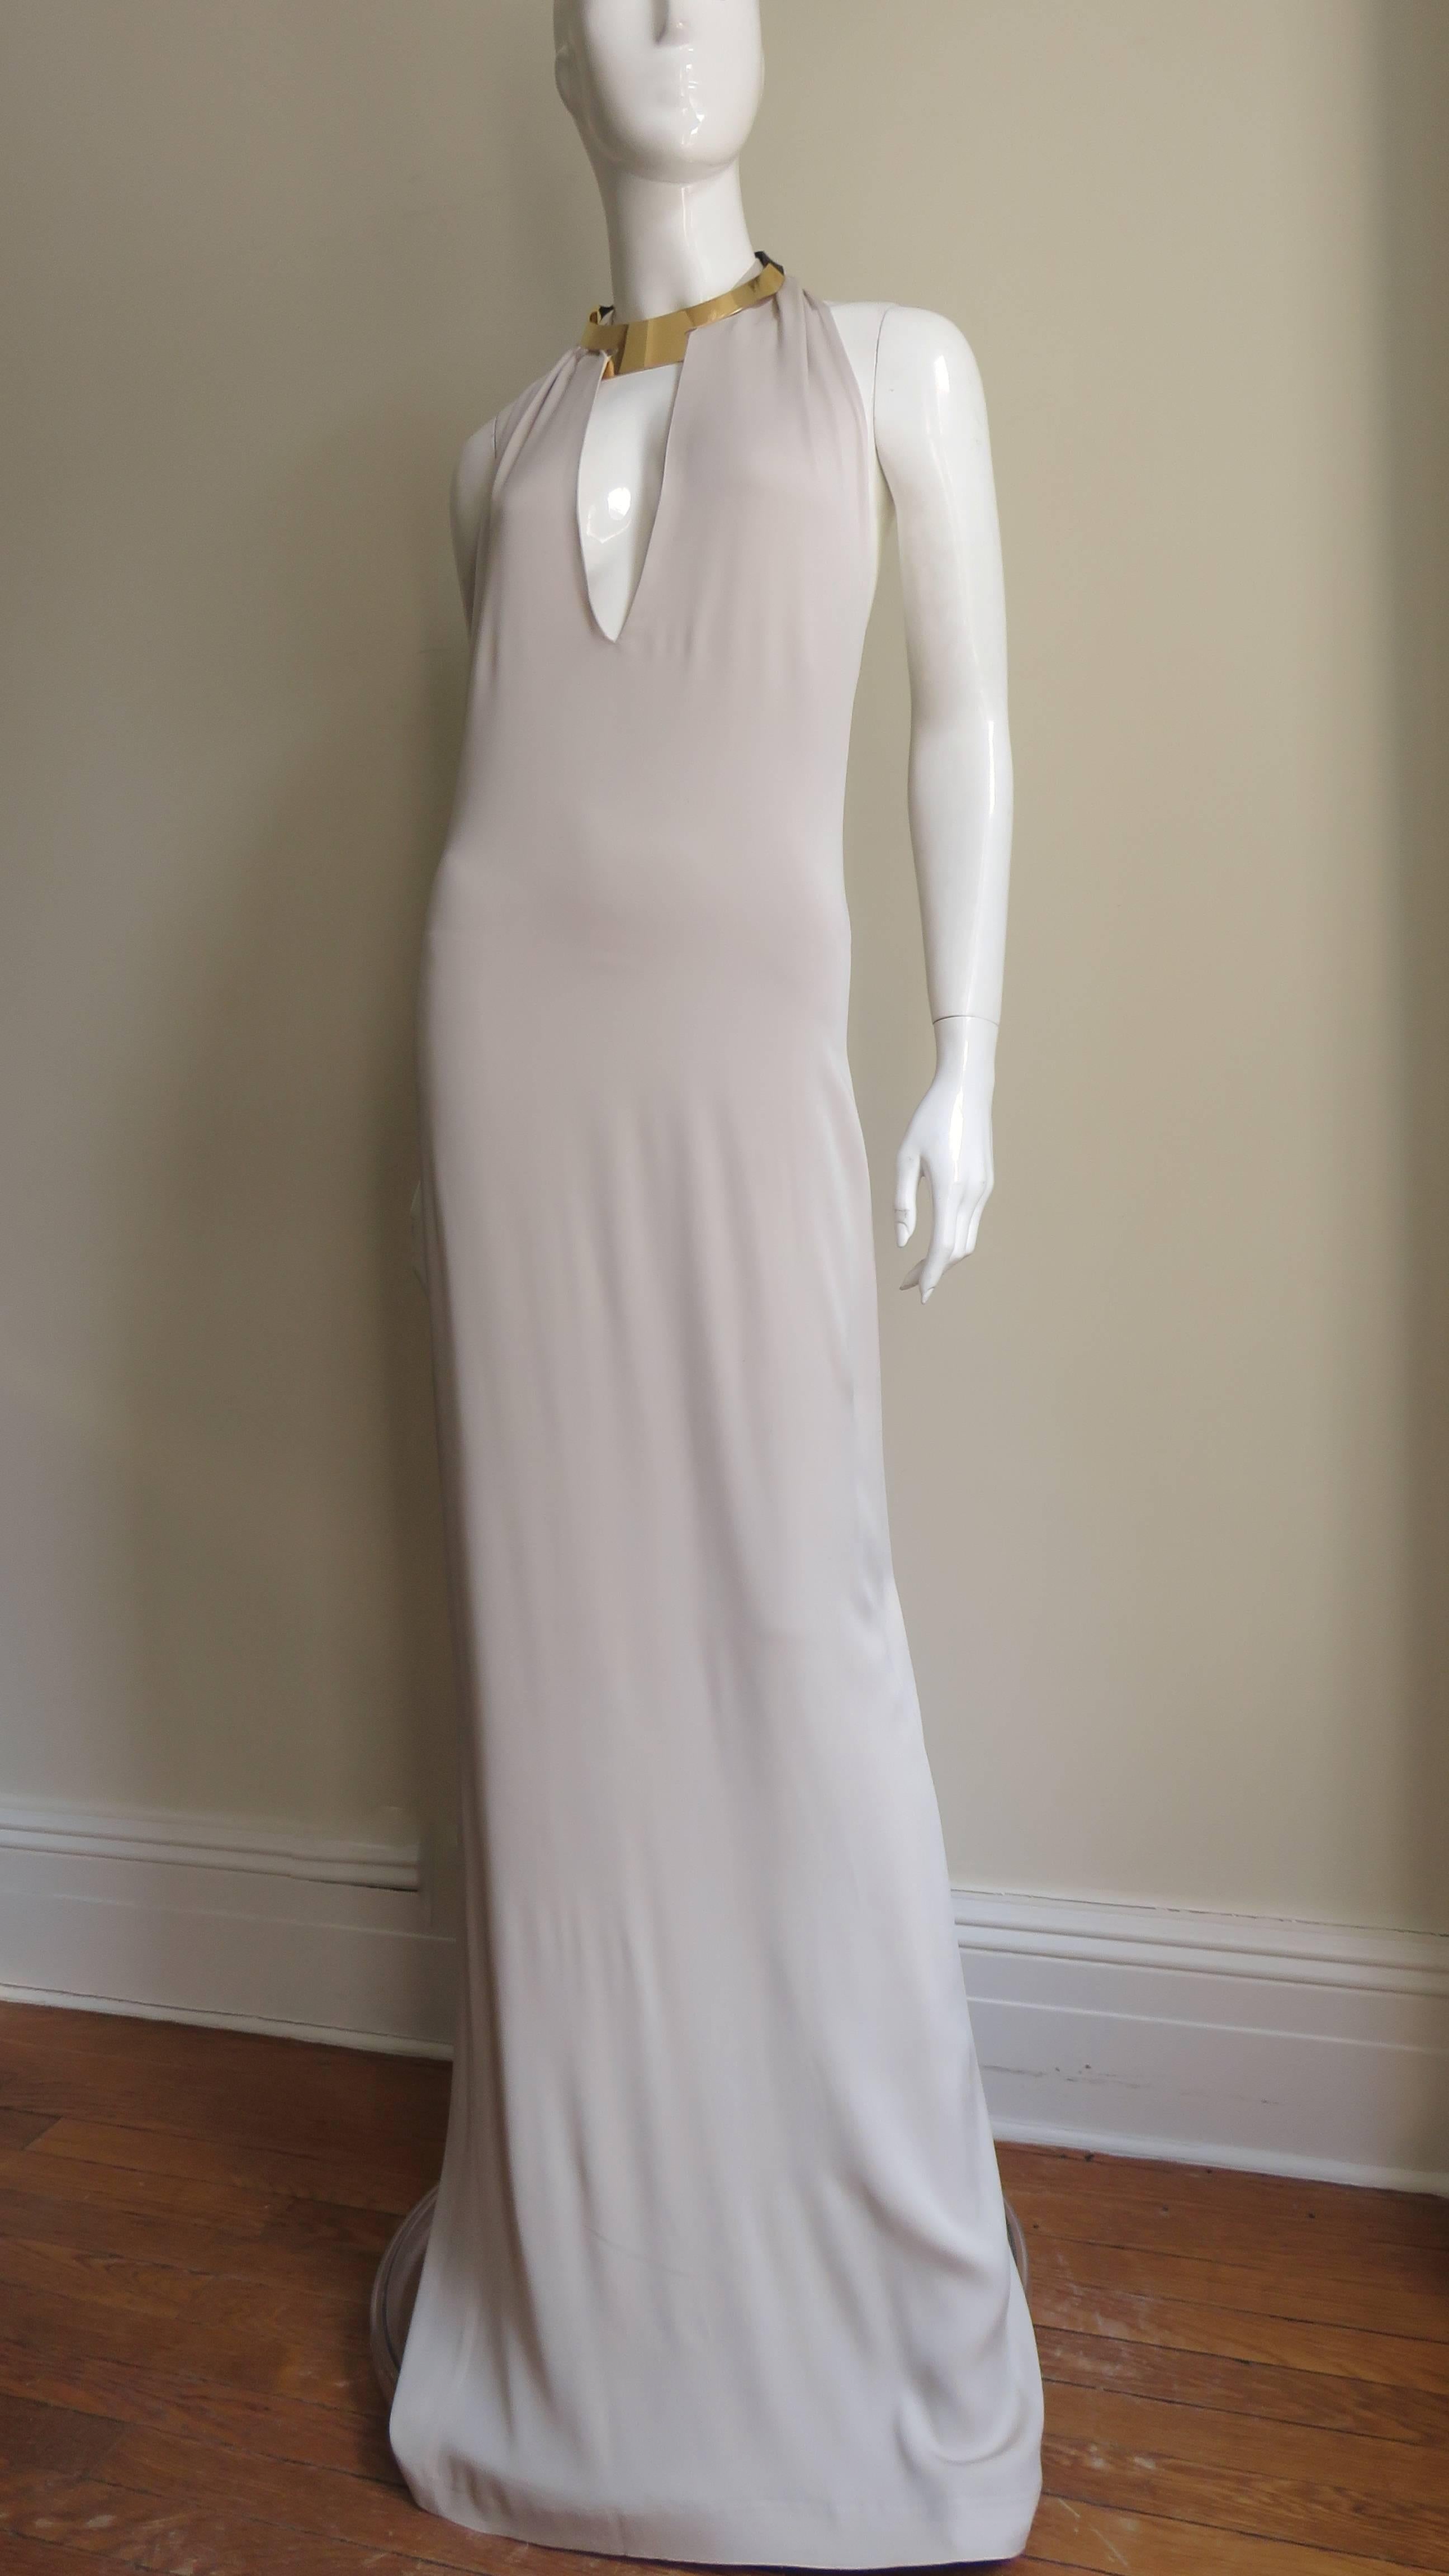 1996 Tom Ford For Gucci Hardware Collar Backless Dress  4